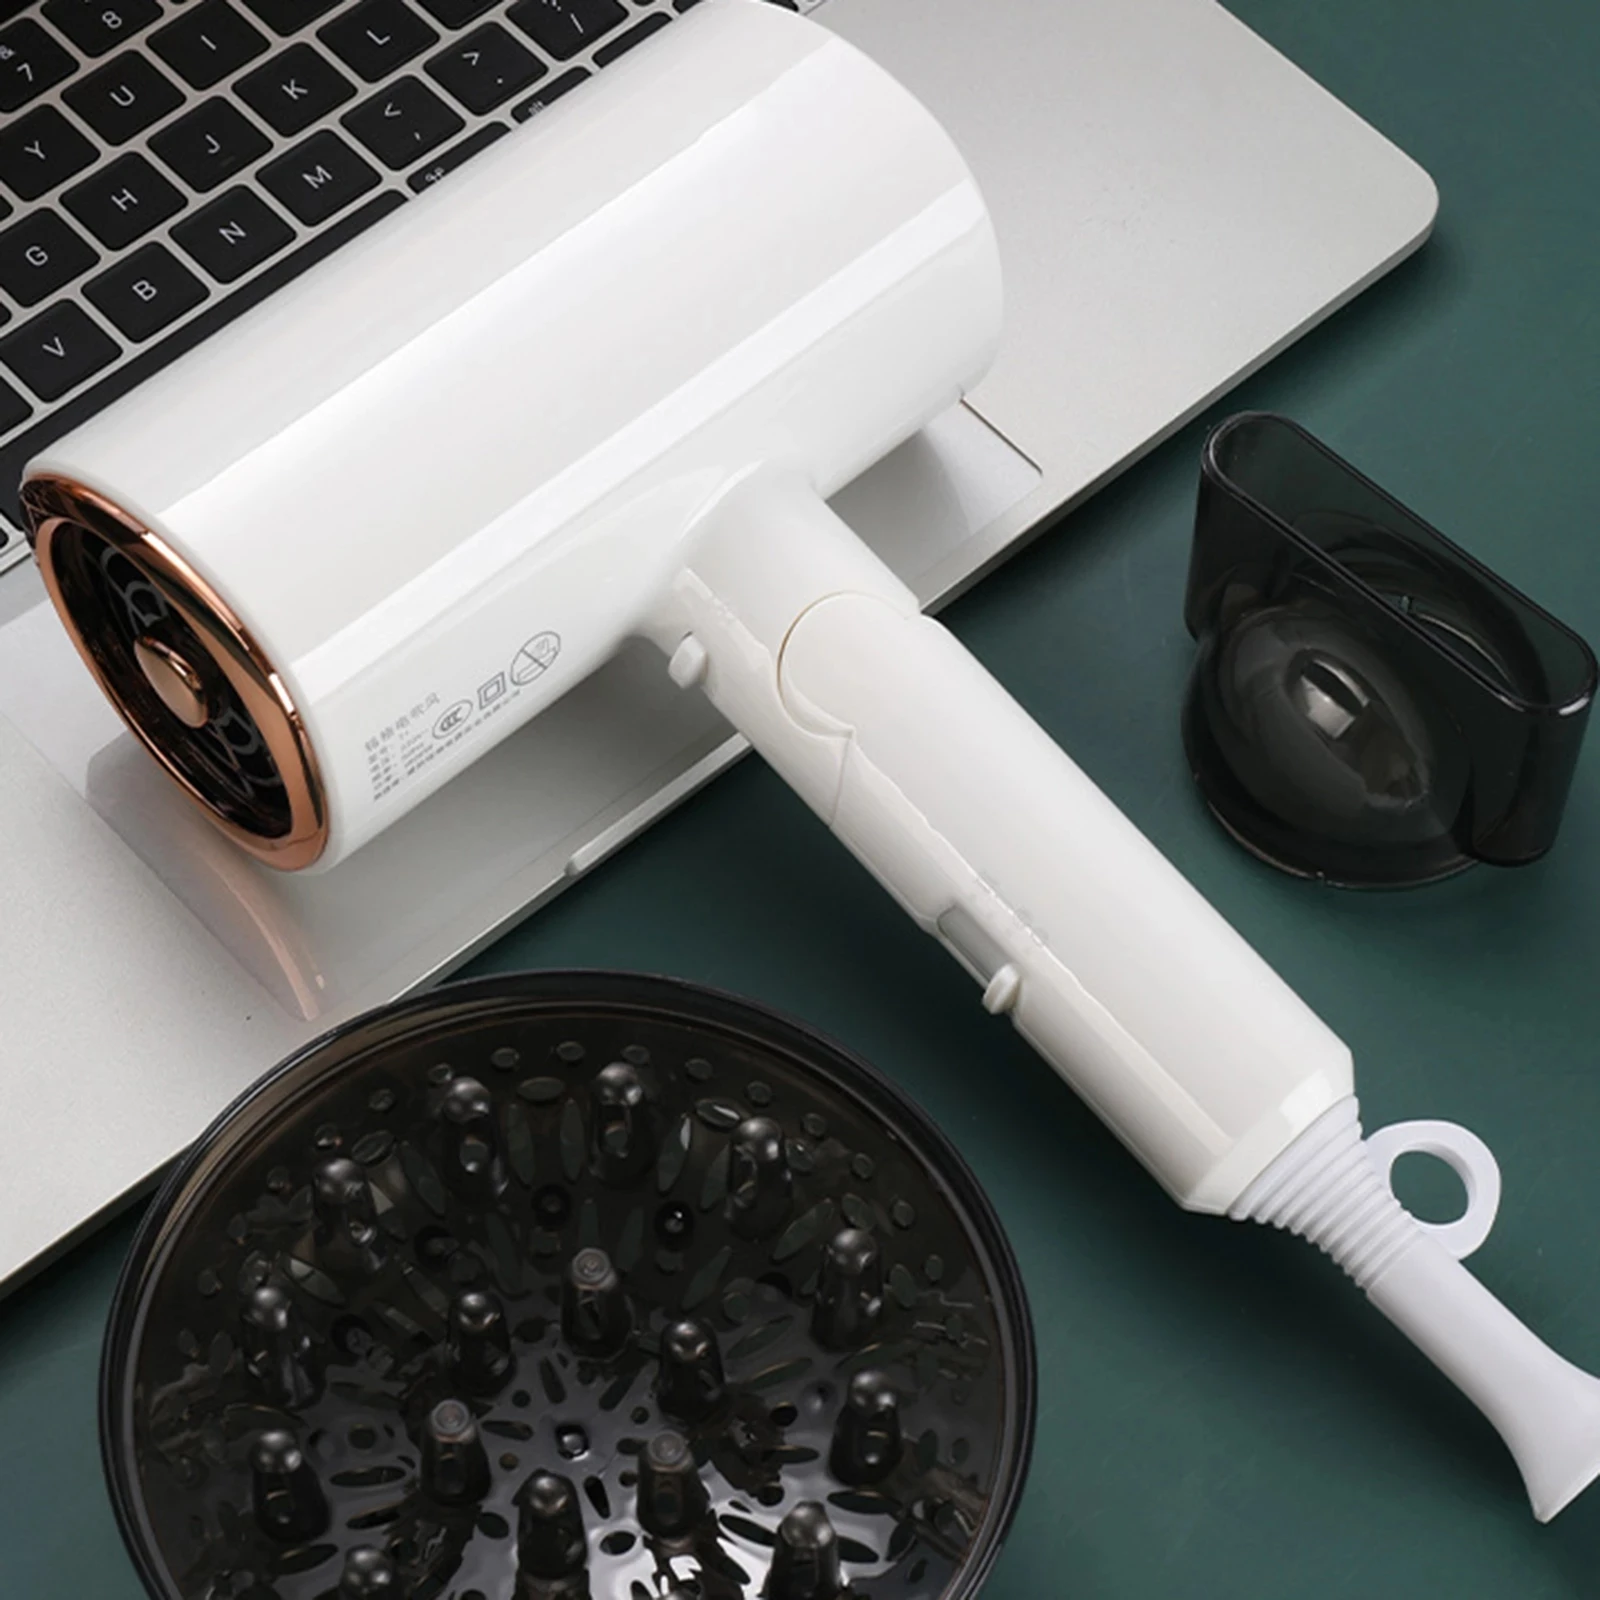 Mini travel hair dryer Compact folding handle hair dryerhot and cold speed settingsafety protection